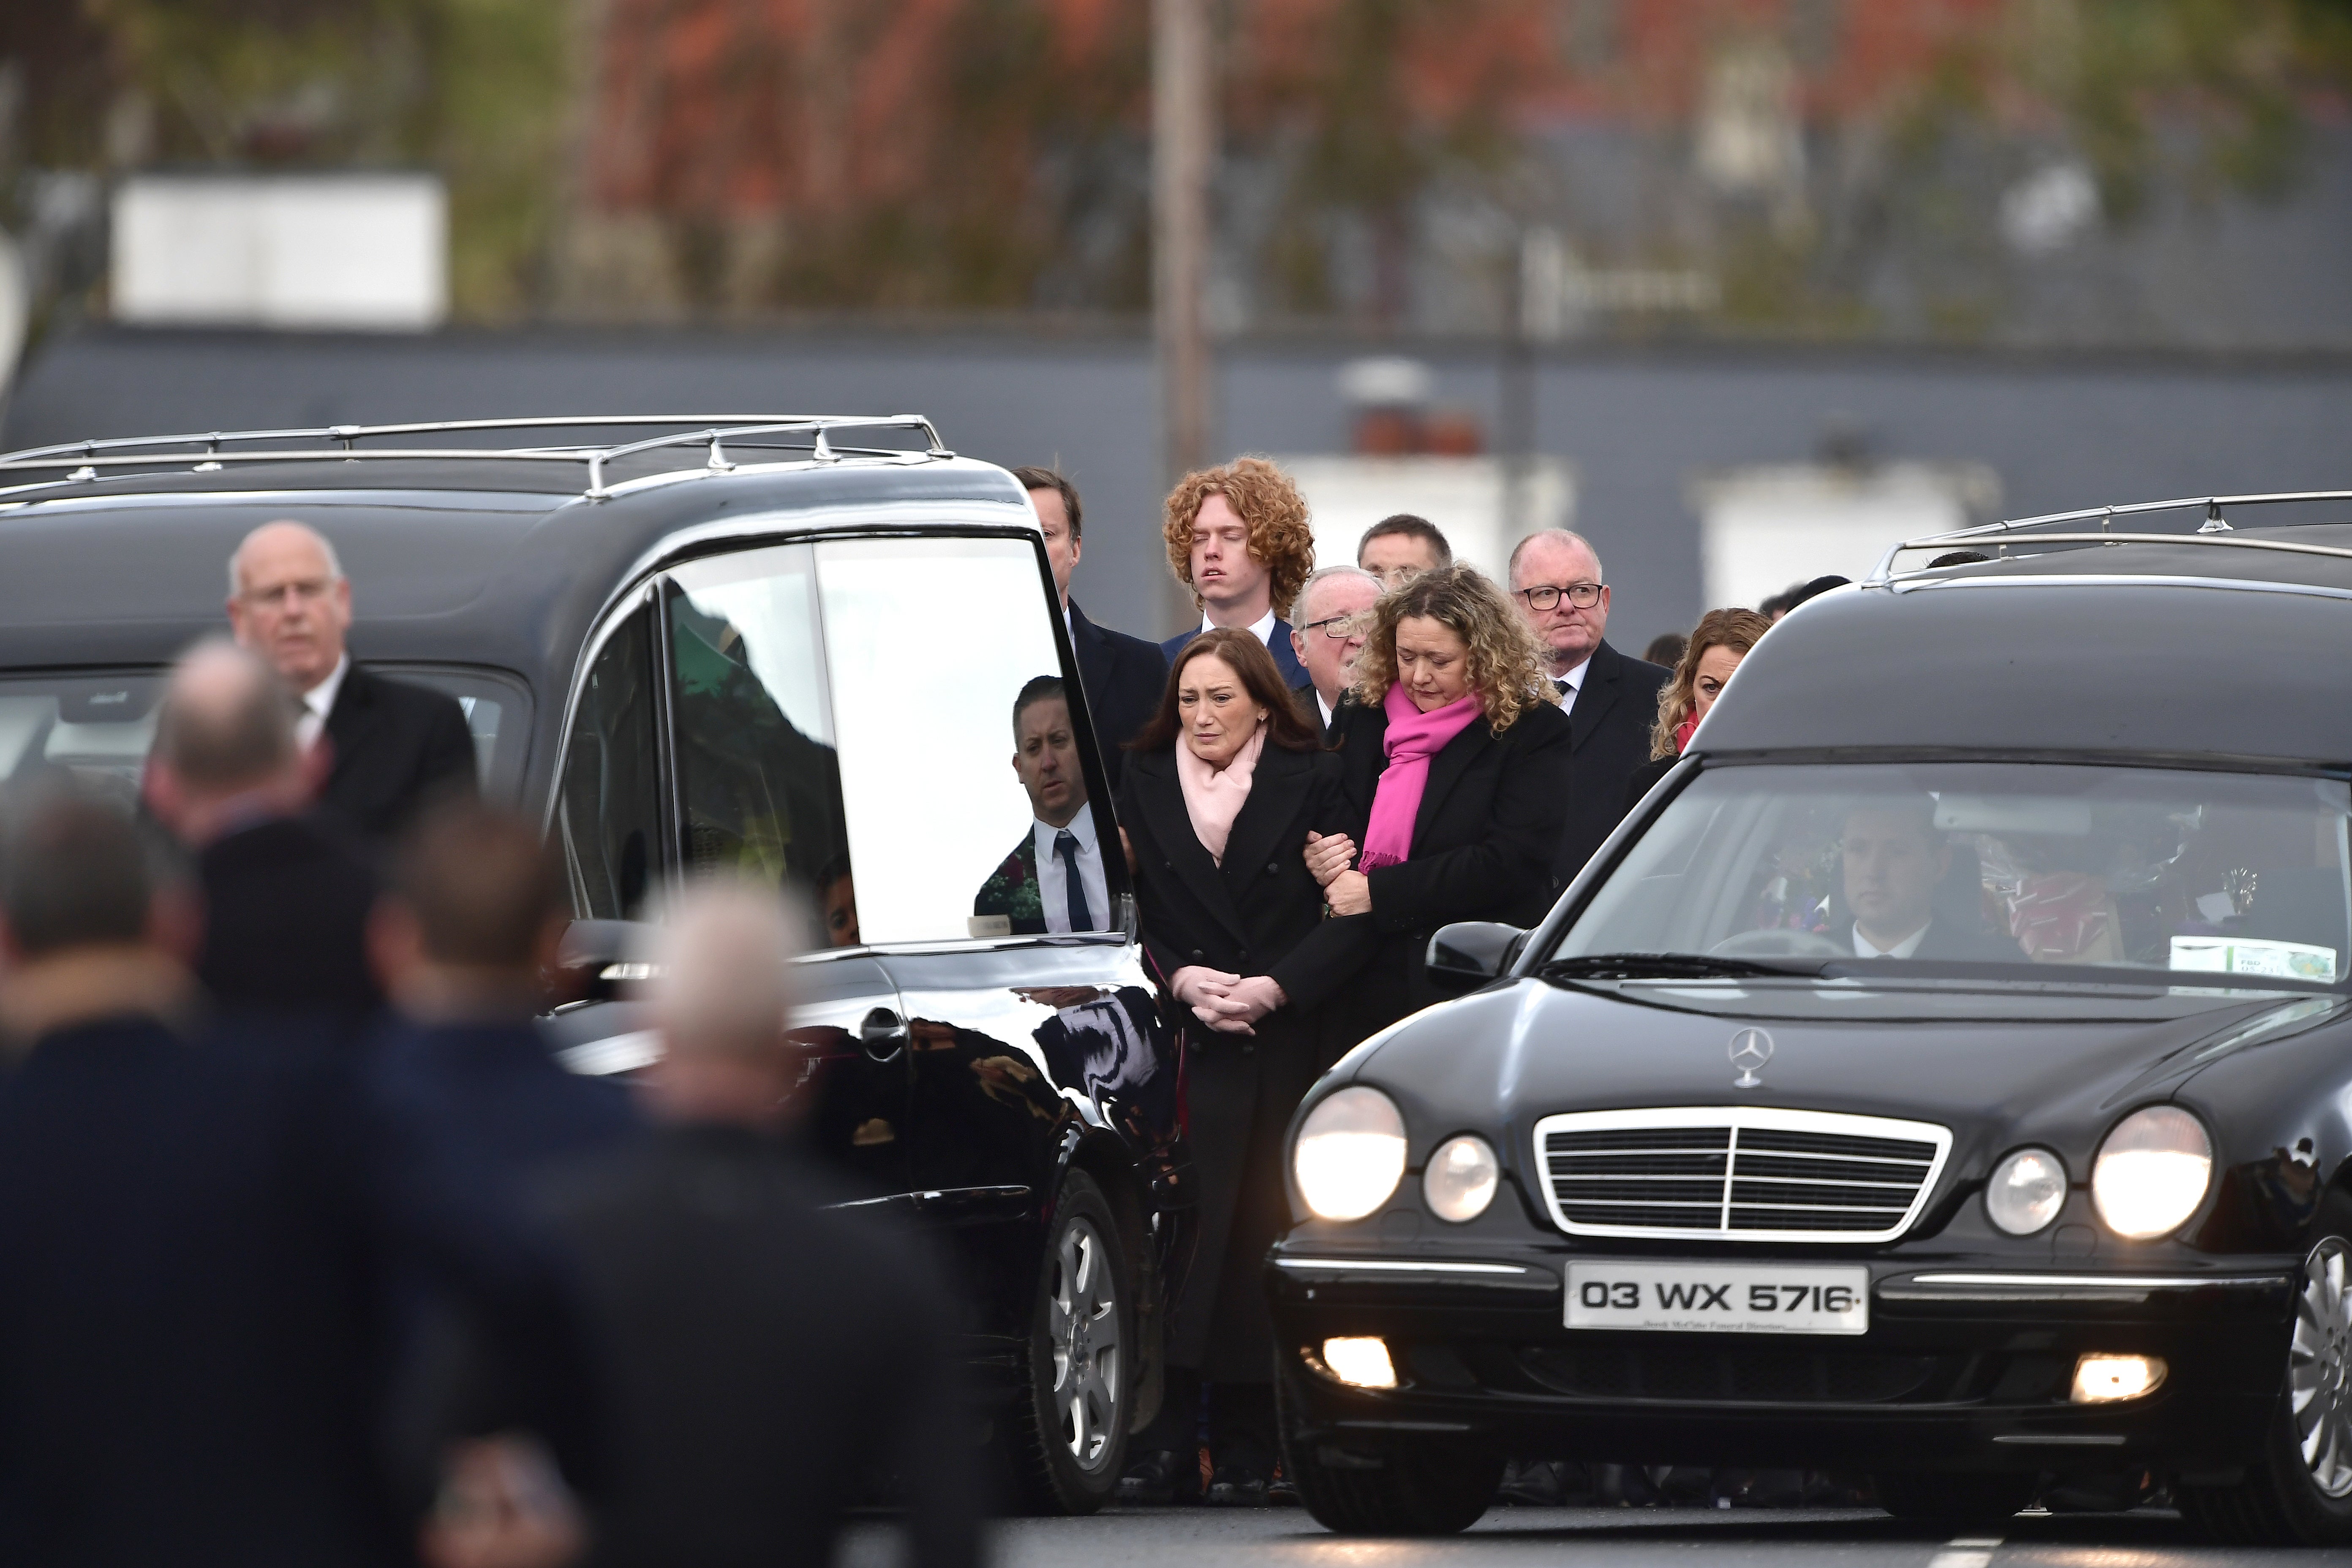 Family members follow the two hearses at the funerals of Robert Garwe, aged 50, and his daughter Shauna Flanagan Garwe, aged five